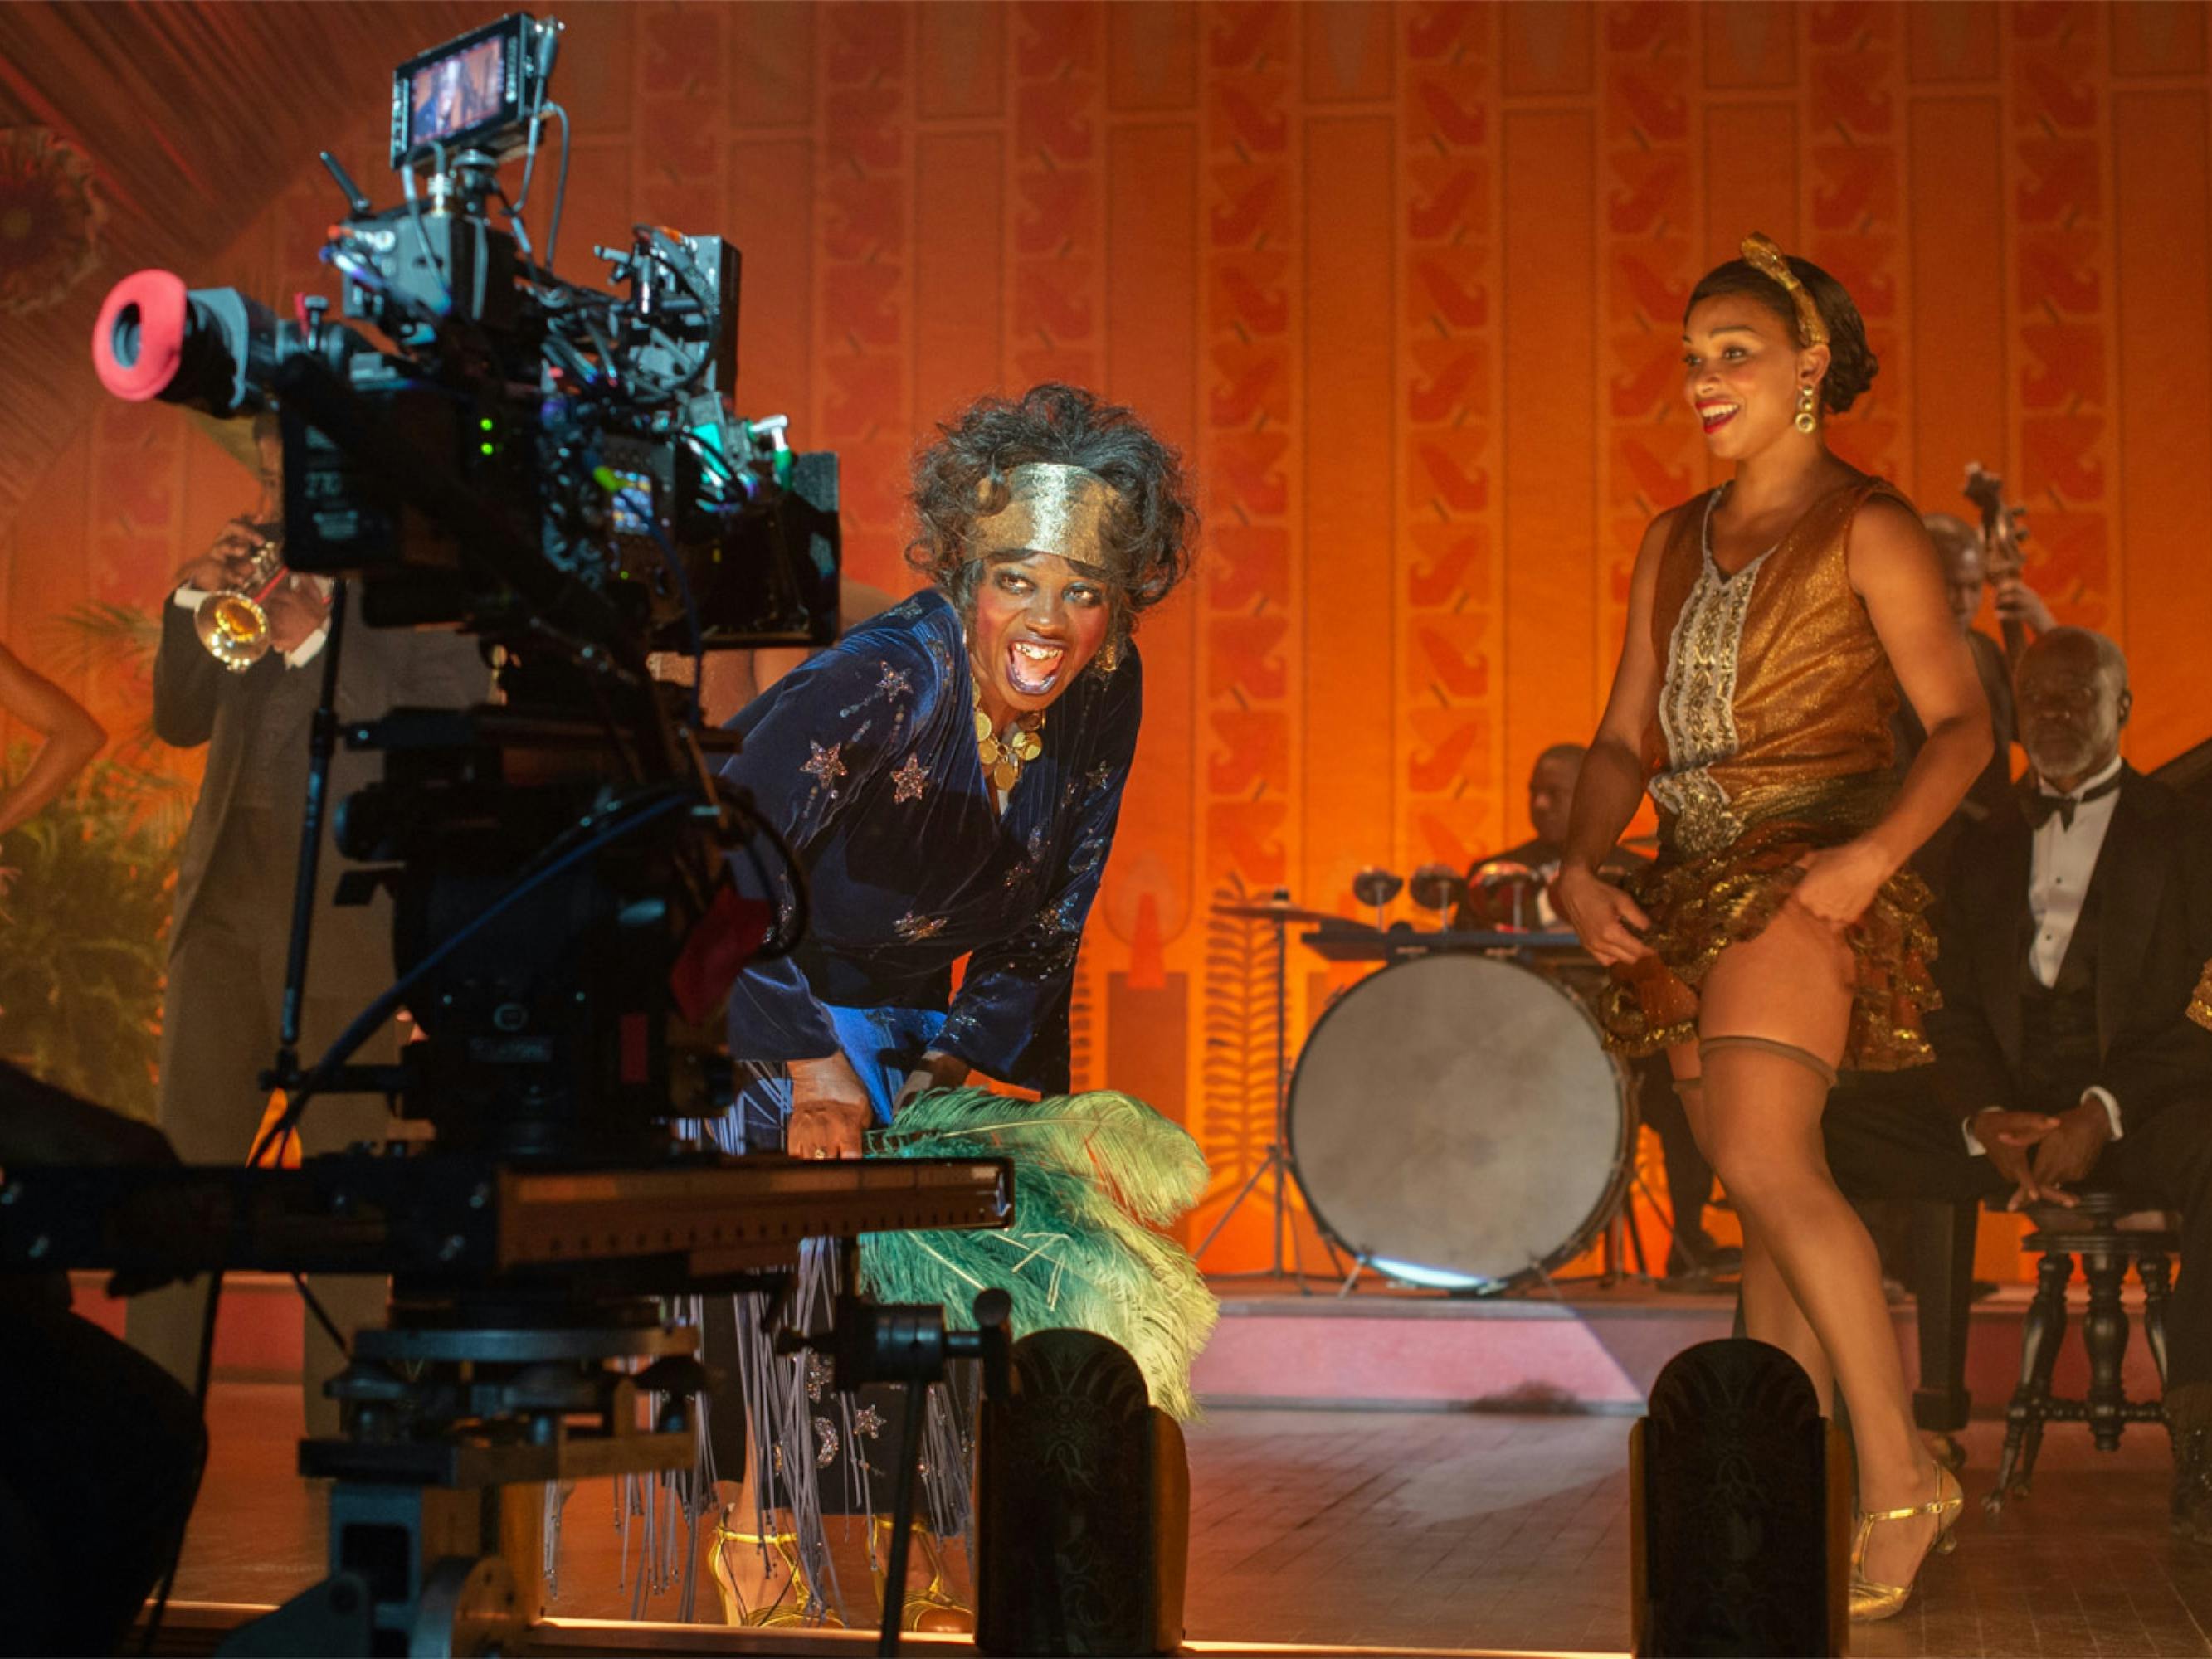 Viola Davis leans into a camera with a provocative, playful look as she shoots this tent show scene from Ma Rainey’s Black Bottom. She is surrounded by actors in heels and short skirts, playing dancers.